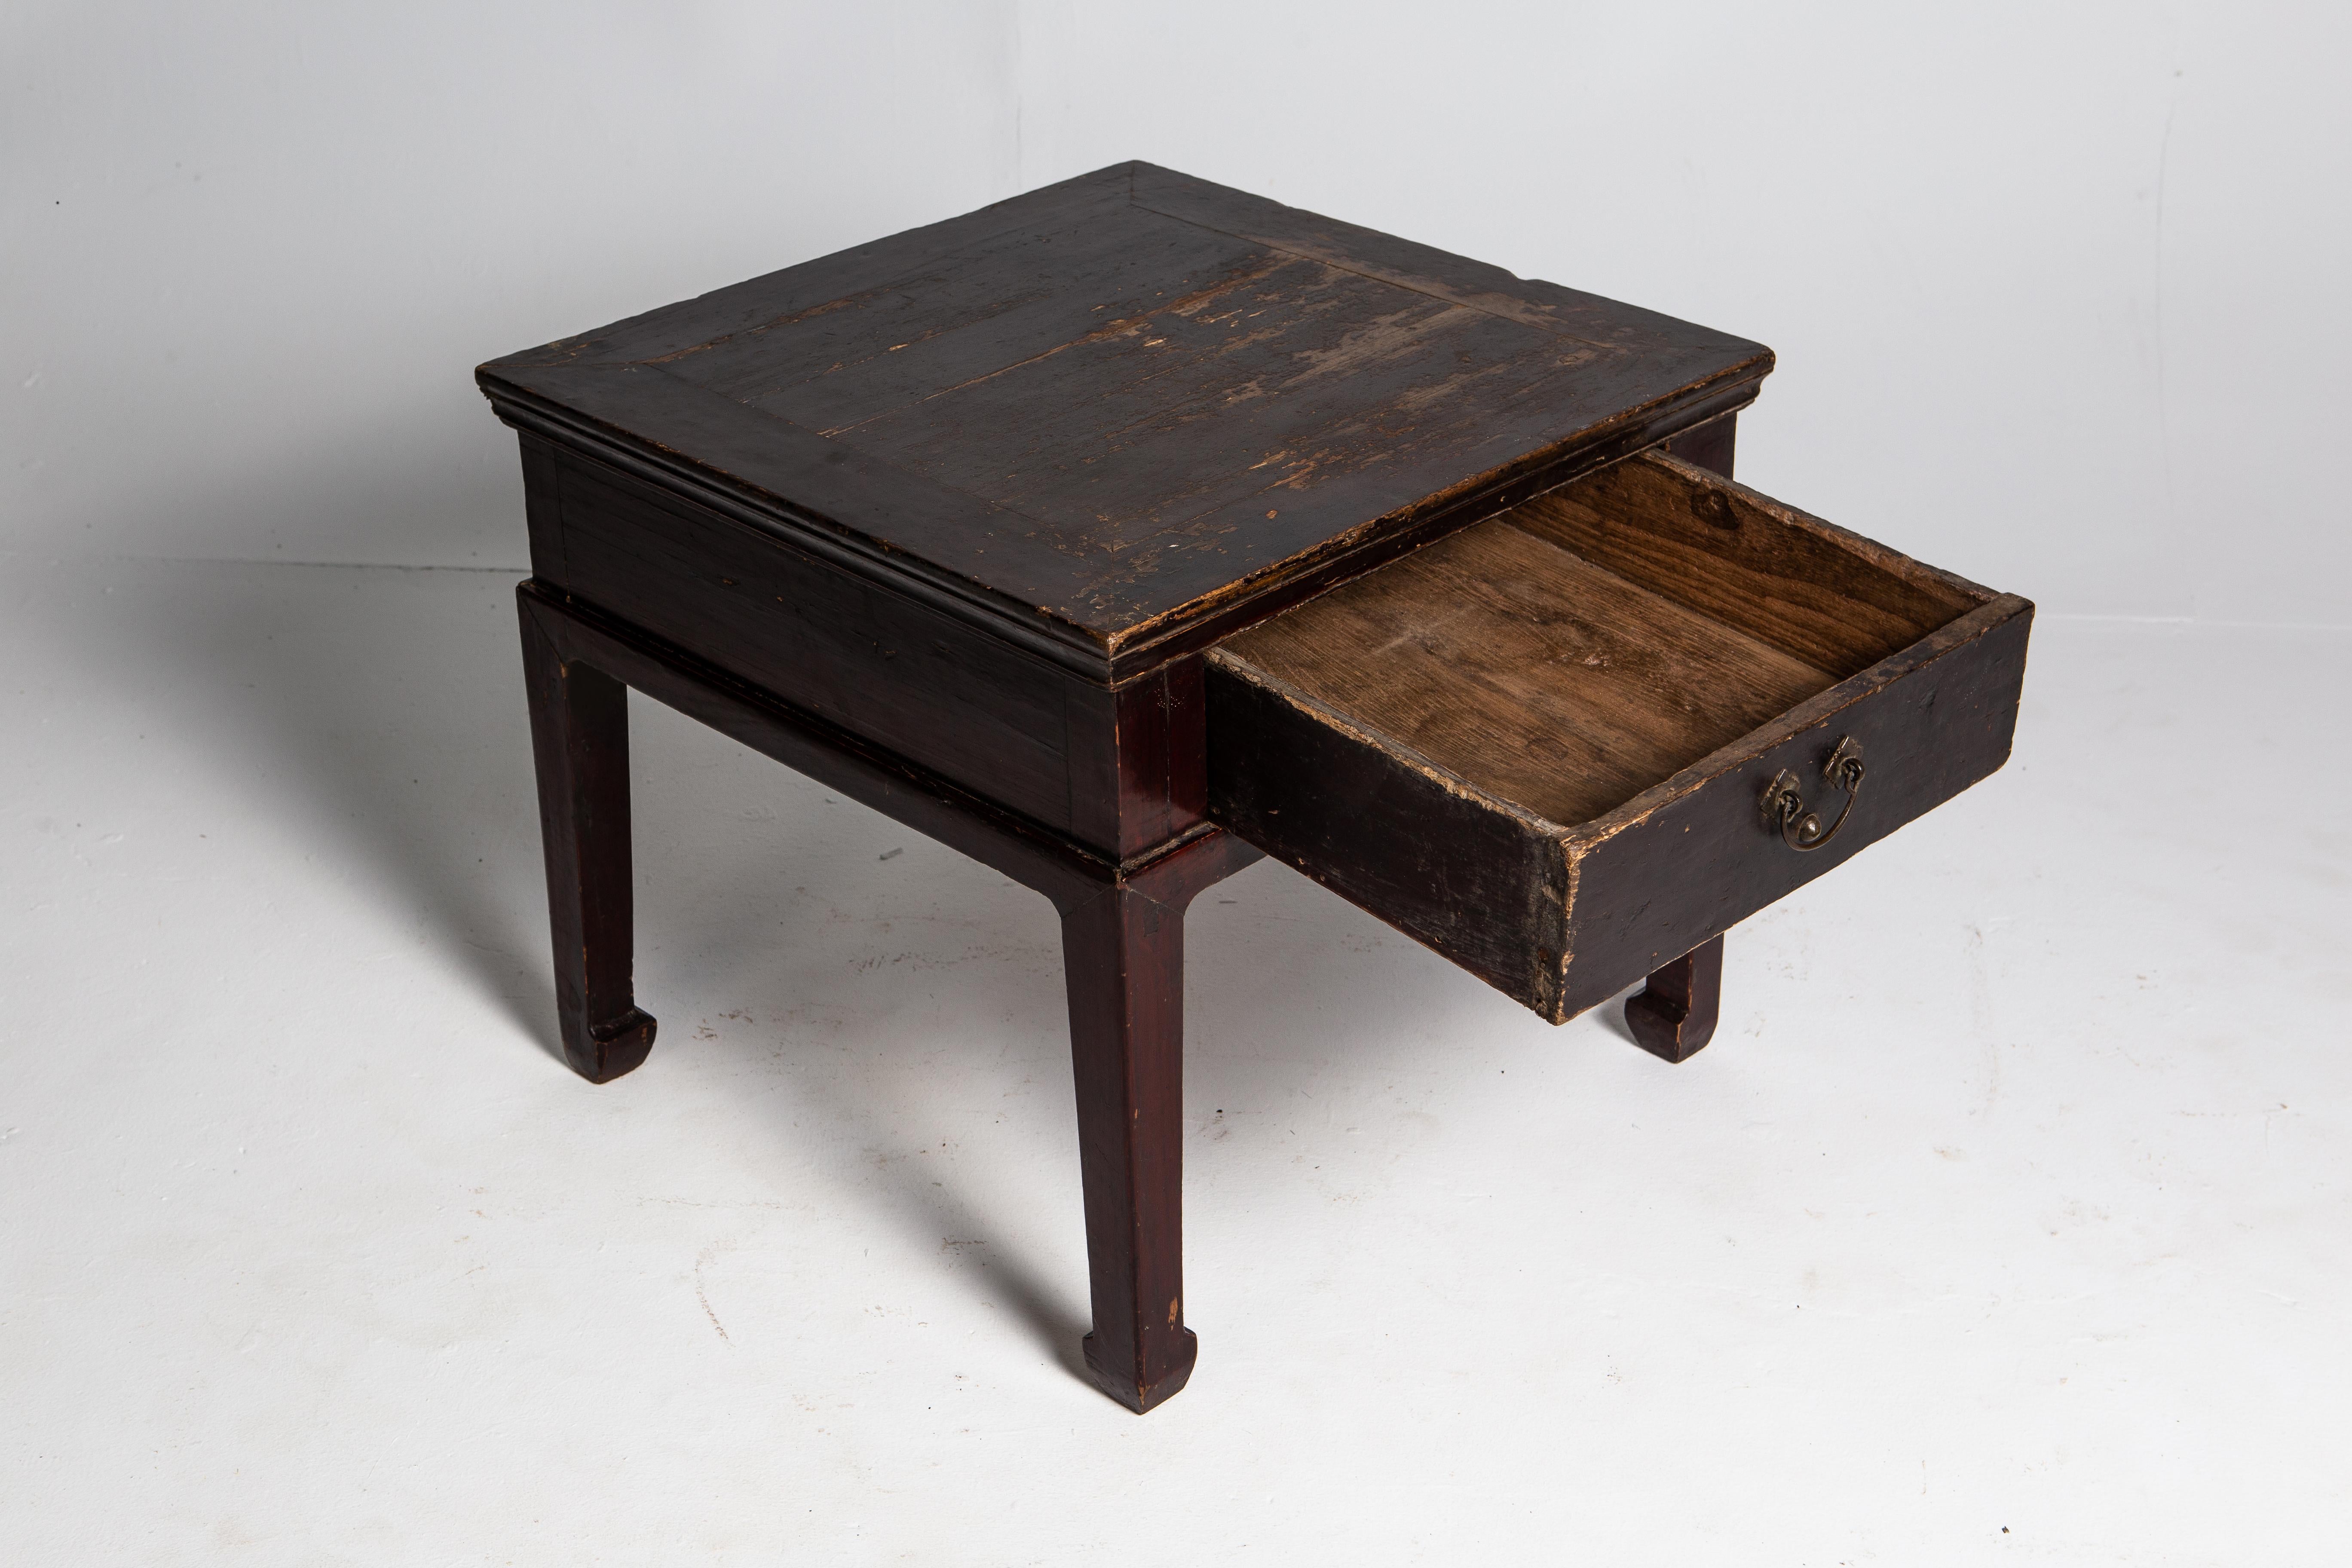 19th Century Late Qing Dynasty Small Square Table with Drawer